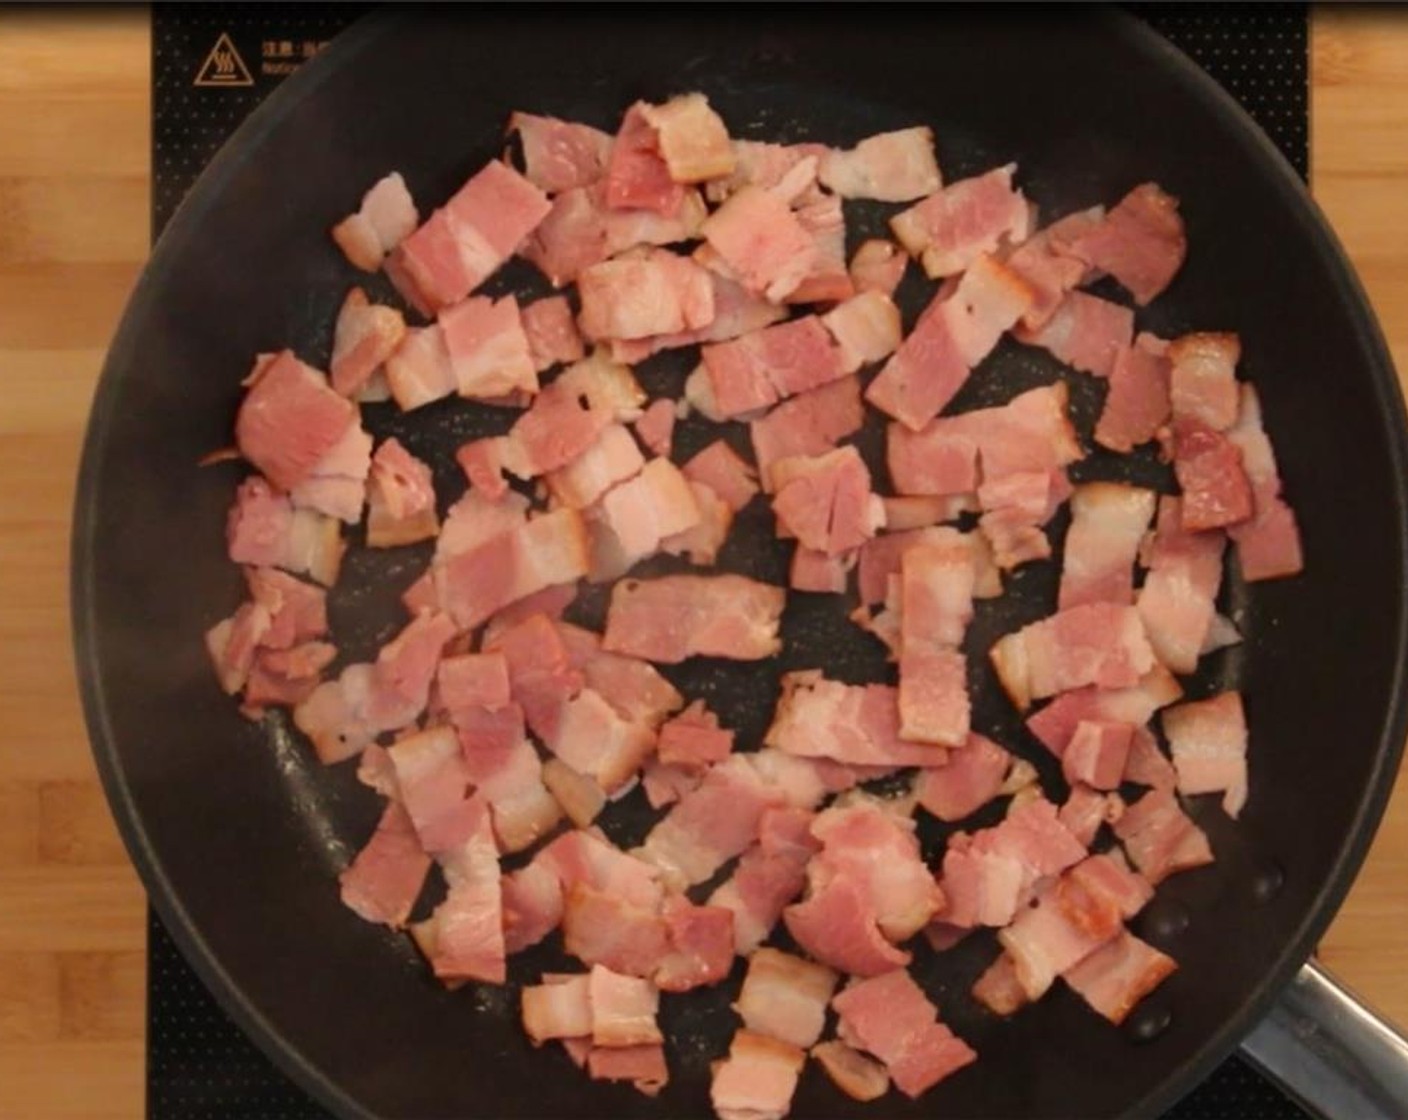 step 1 Preheat oven to 350 degrees F (180 degrees C). In a saute pan over medium high heat, brown the Bacon (6 slices) pieces until crisp, 8 to 10 minutes.